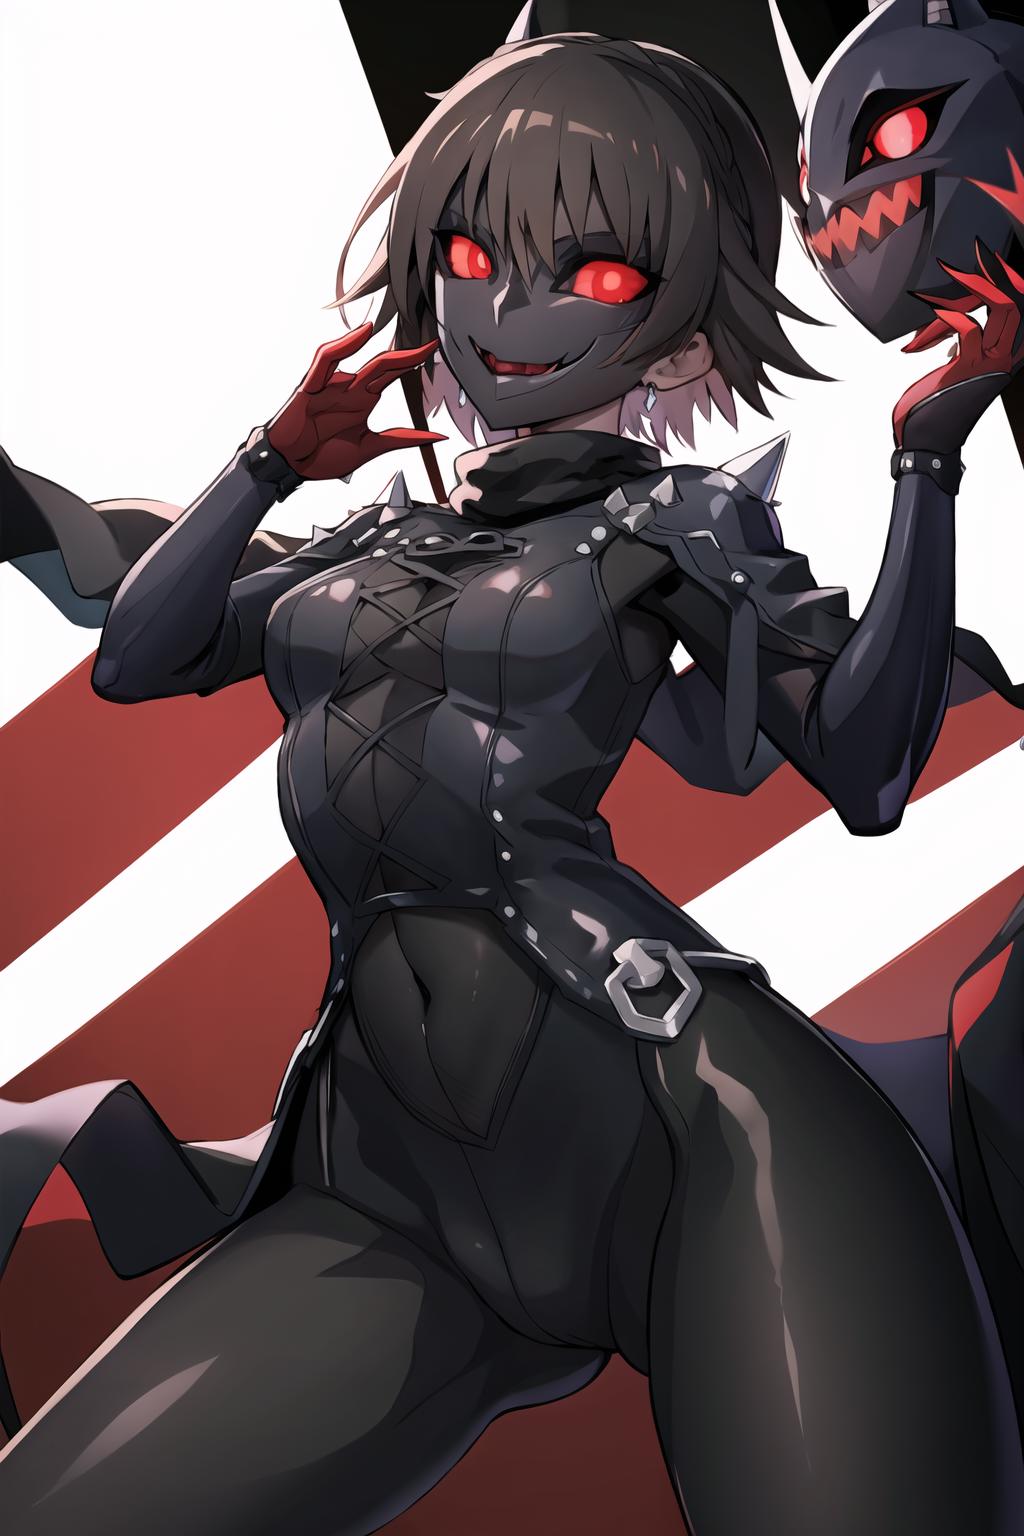 Change-A-Character: Masked Evil Transforms Your Waifu! image by TwoMoreTimes89